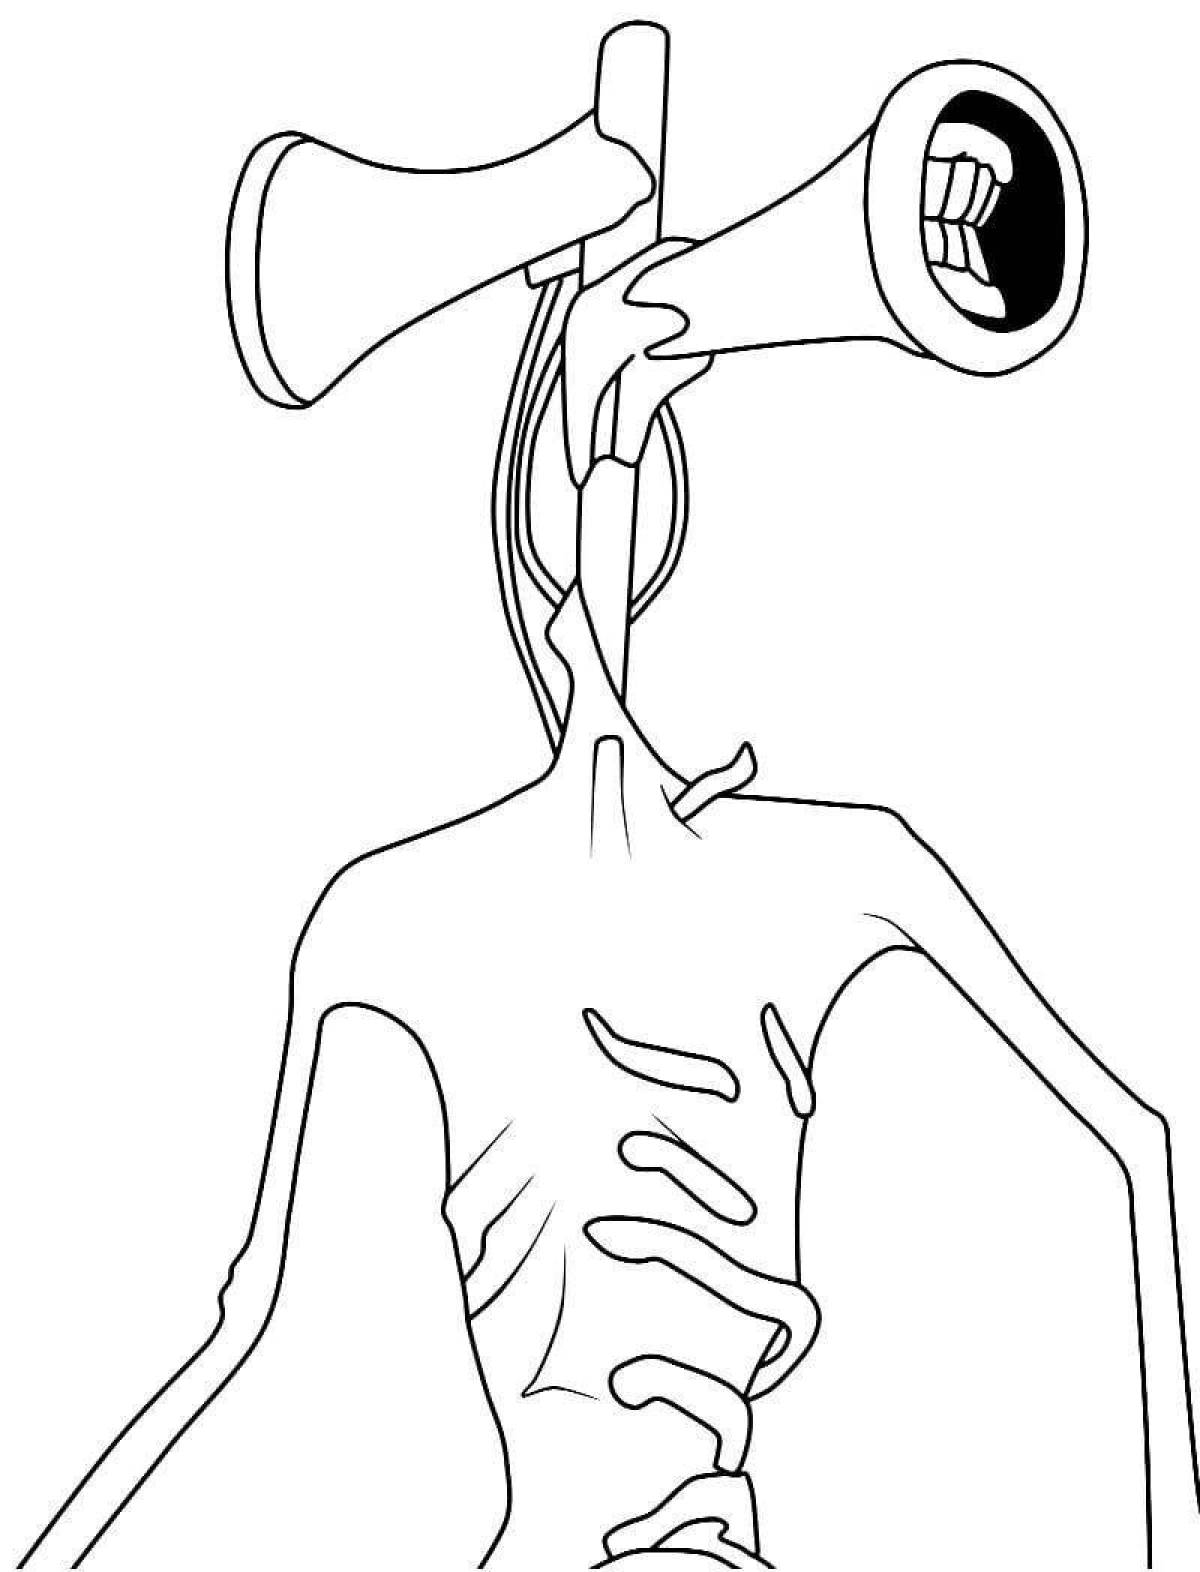 Awesome sereno head coloring page